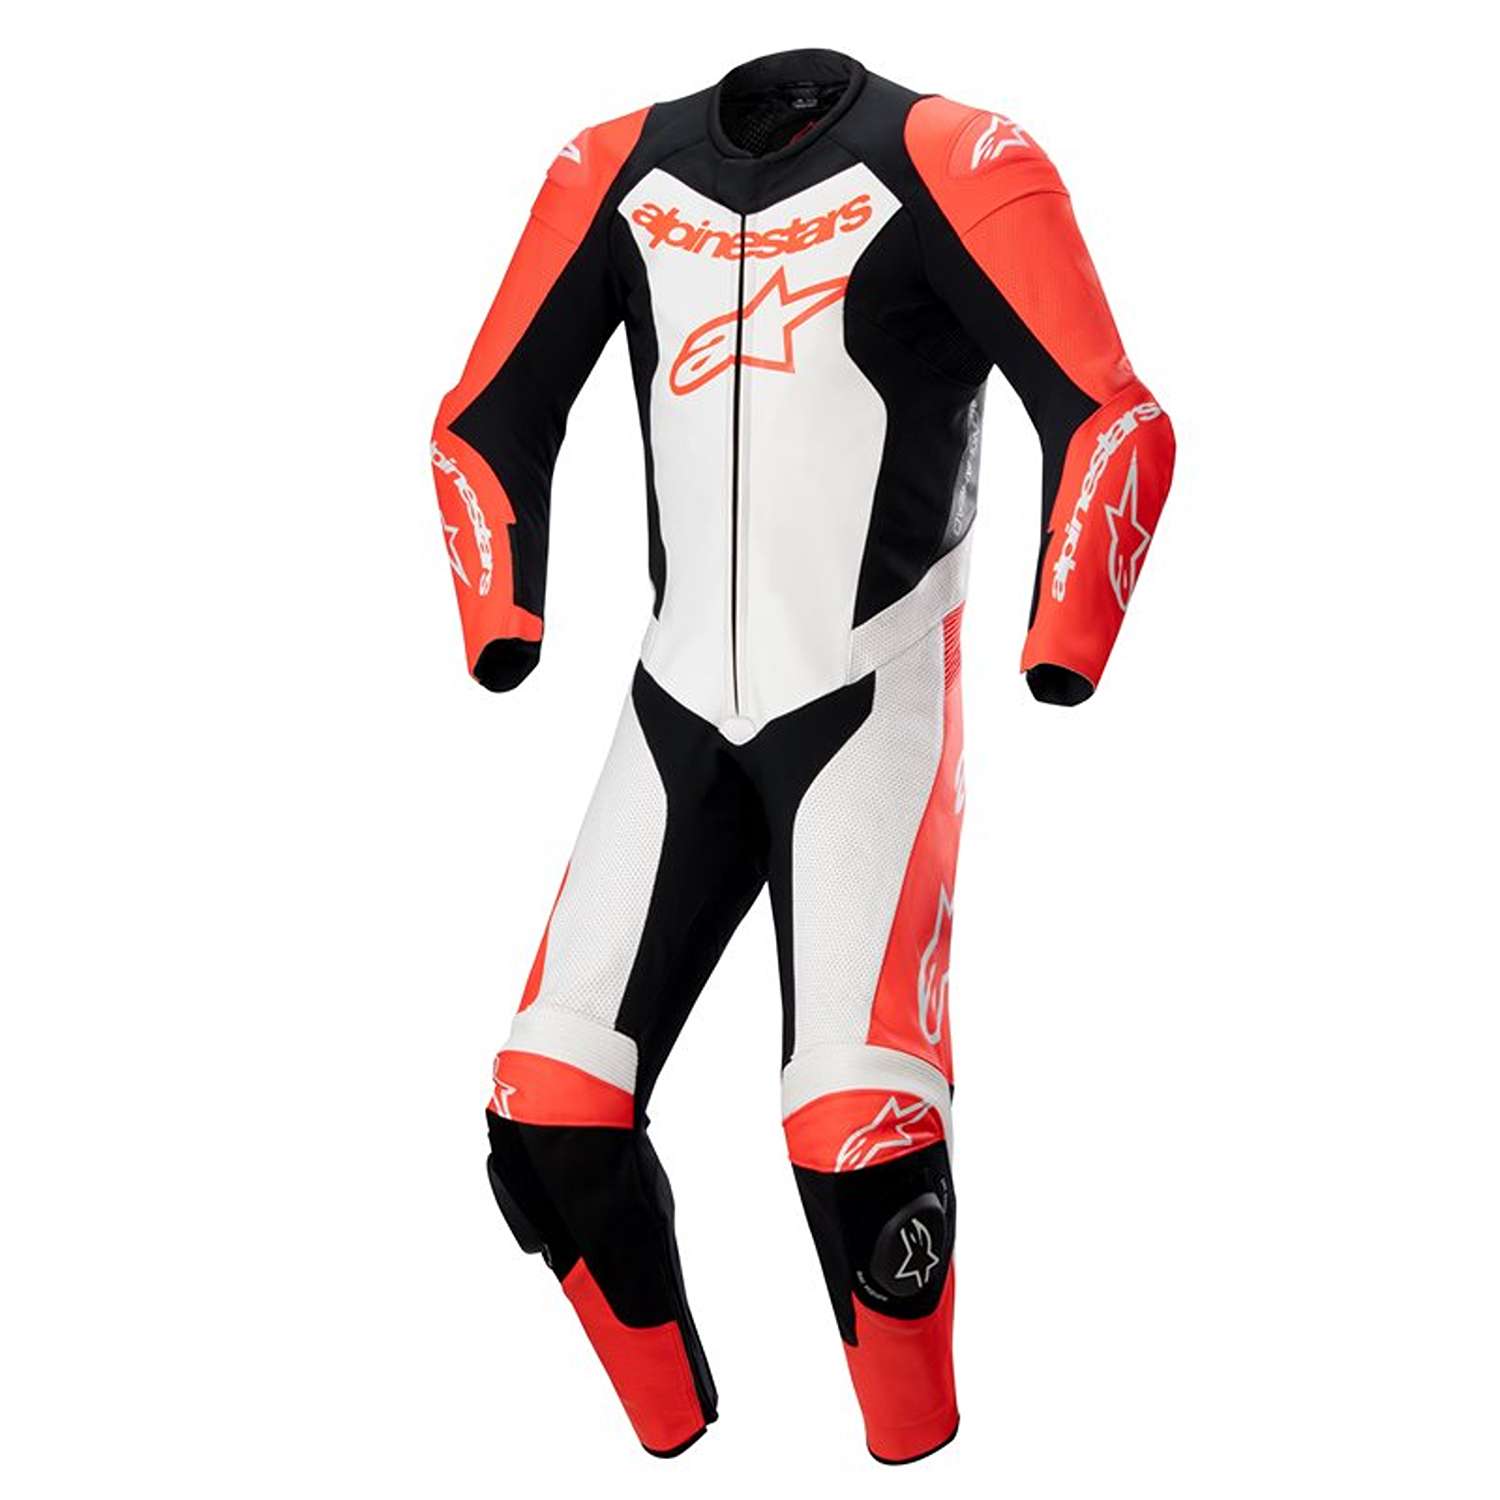 Image of Alpinestars Gp Force Lurv 1Pc Leather Suit Red Fluo White Black Size 58 EN